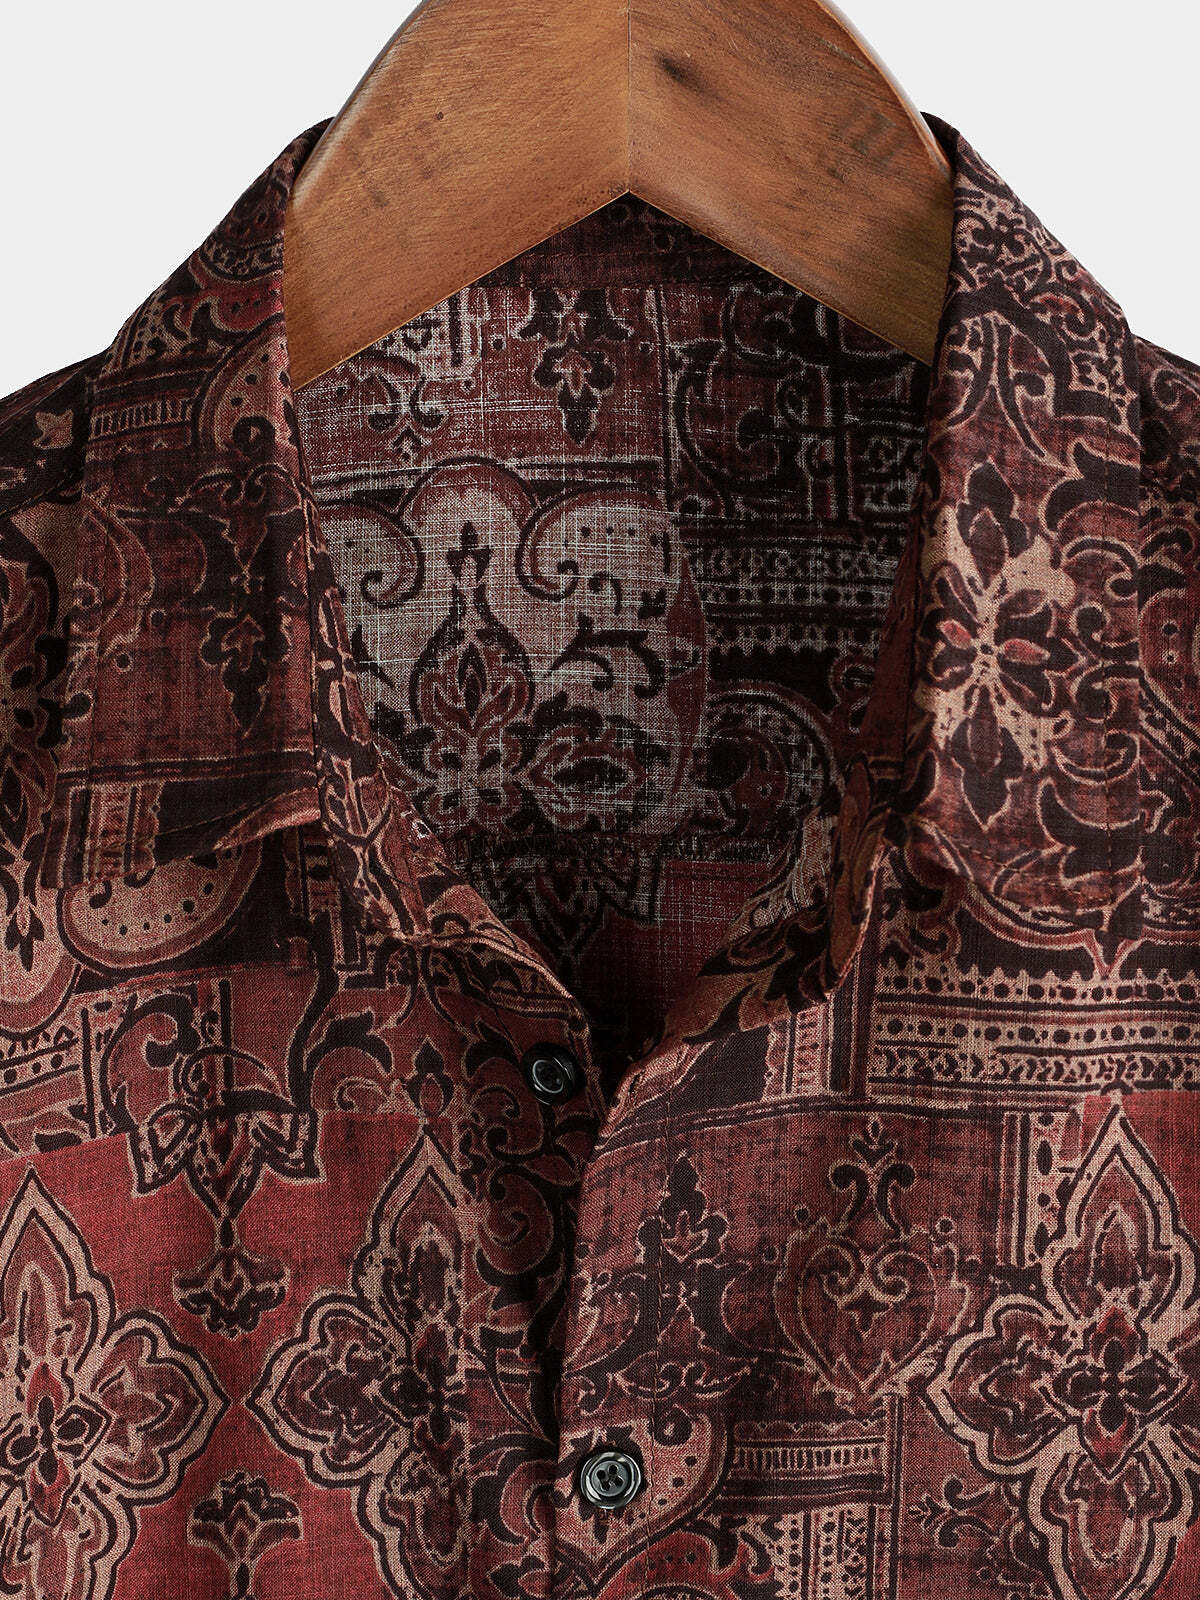 Men's Retro Paisley Floral Print Cotton Button Up Vintage Holiday Western Brown Short Sleeve Shirt